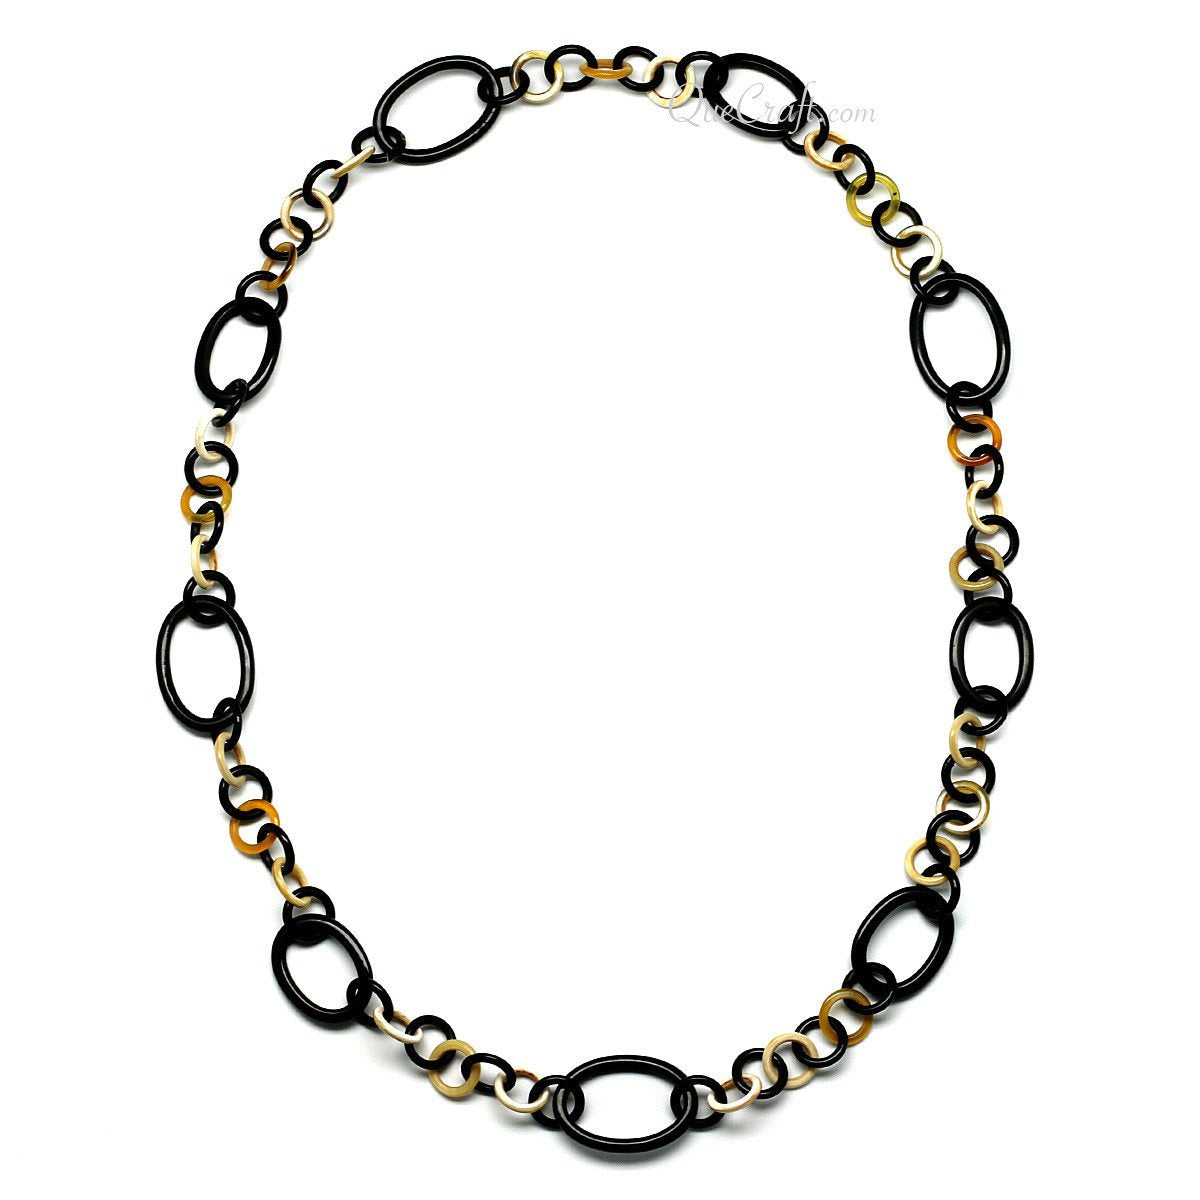 Horn Chain Necklace #10096 - HORN JEWELRY